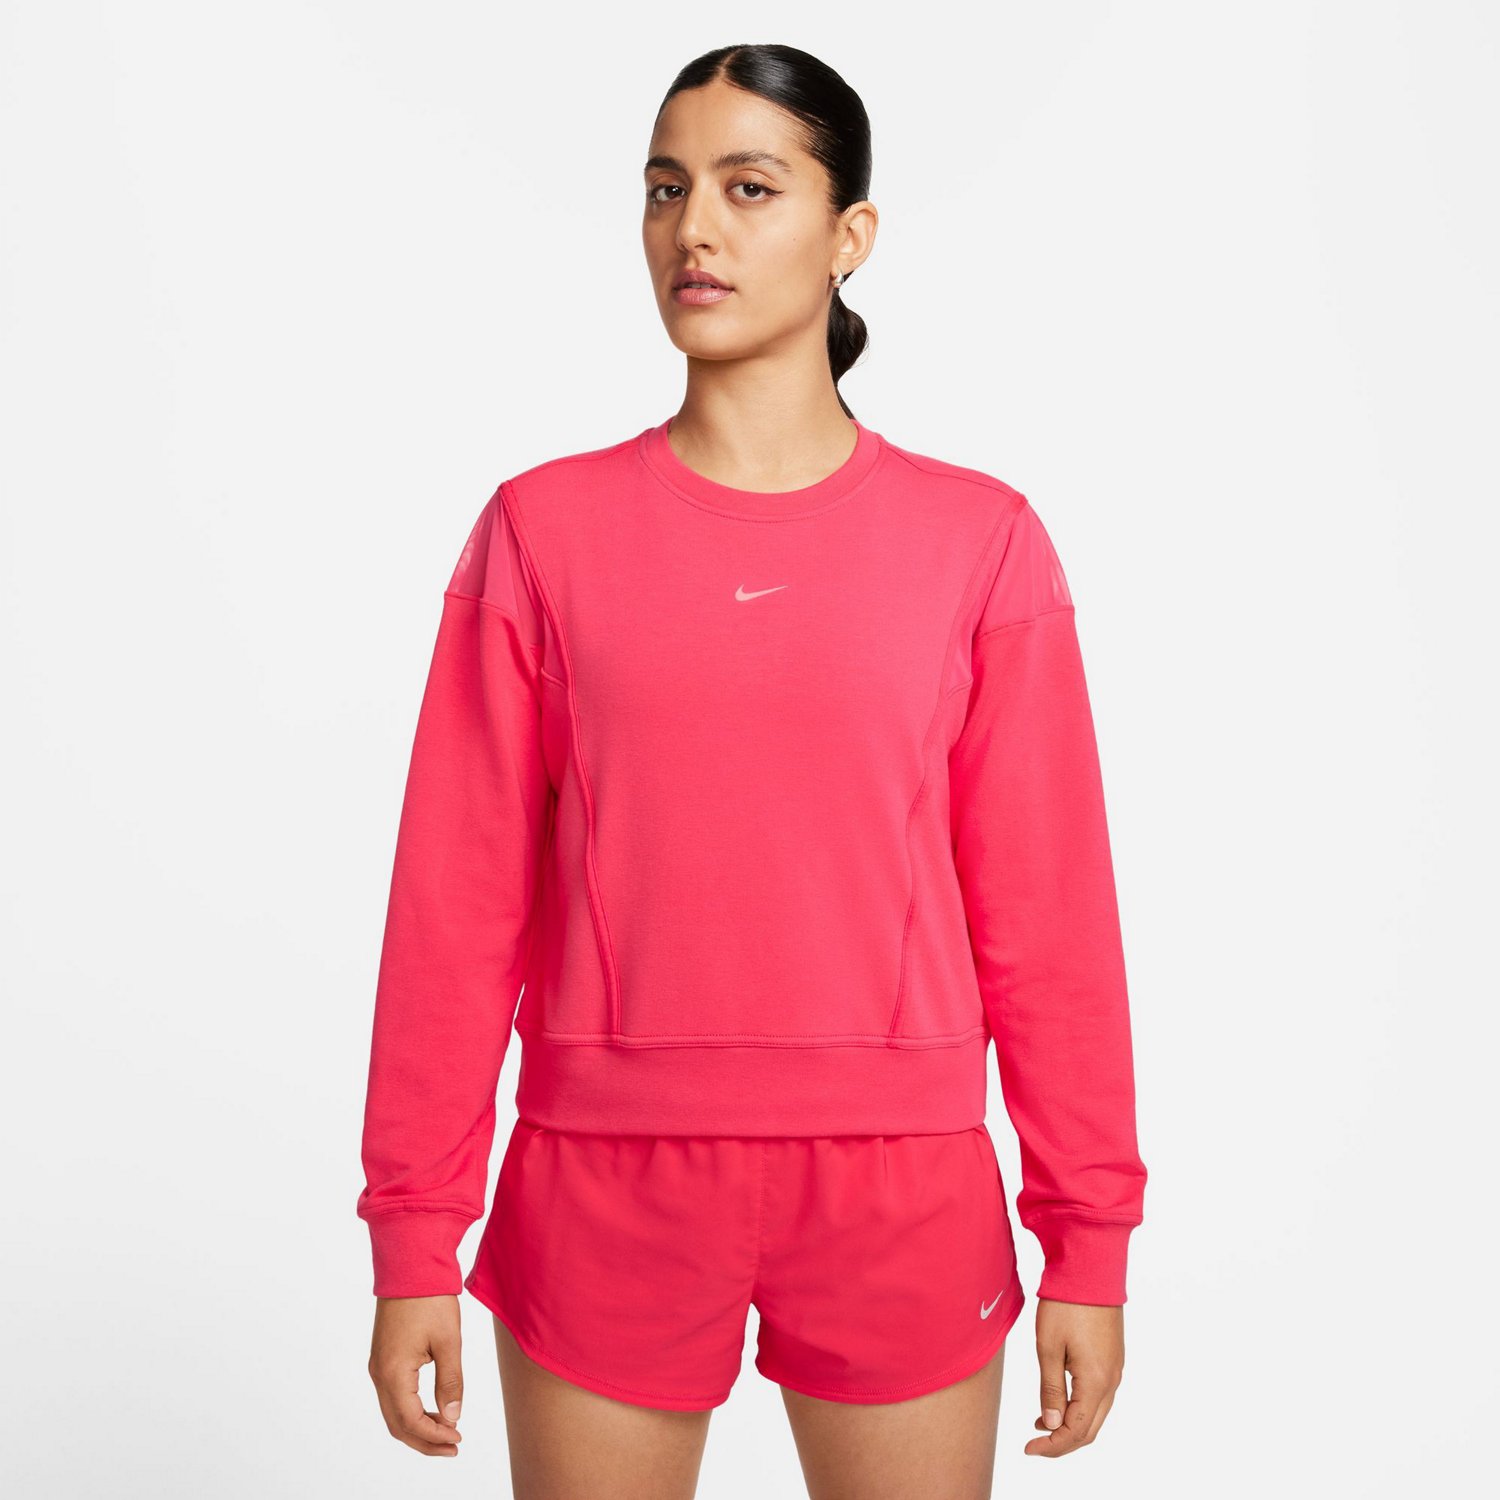 Nike Womens Dri-FIT One Crew Neck Long Sleeve Top